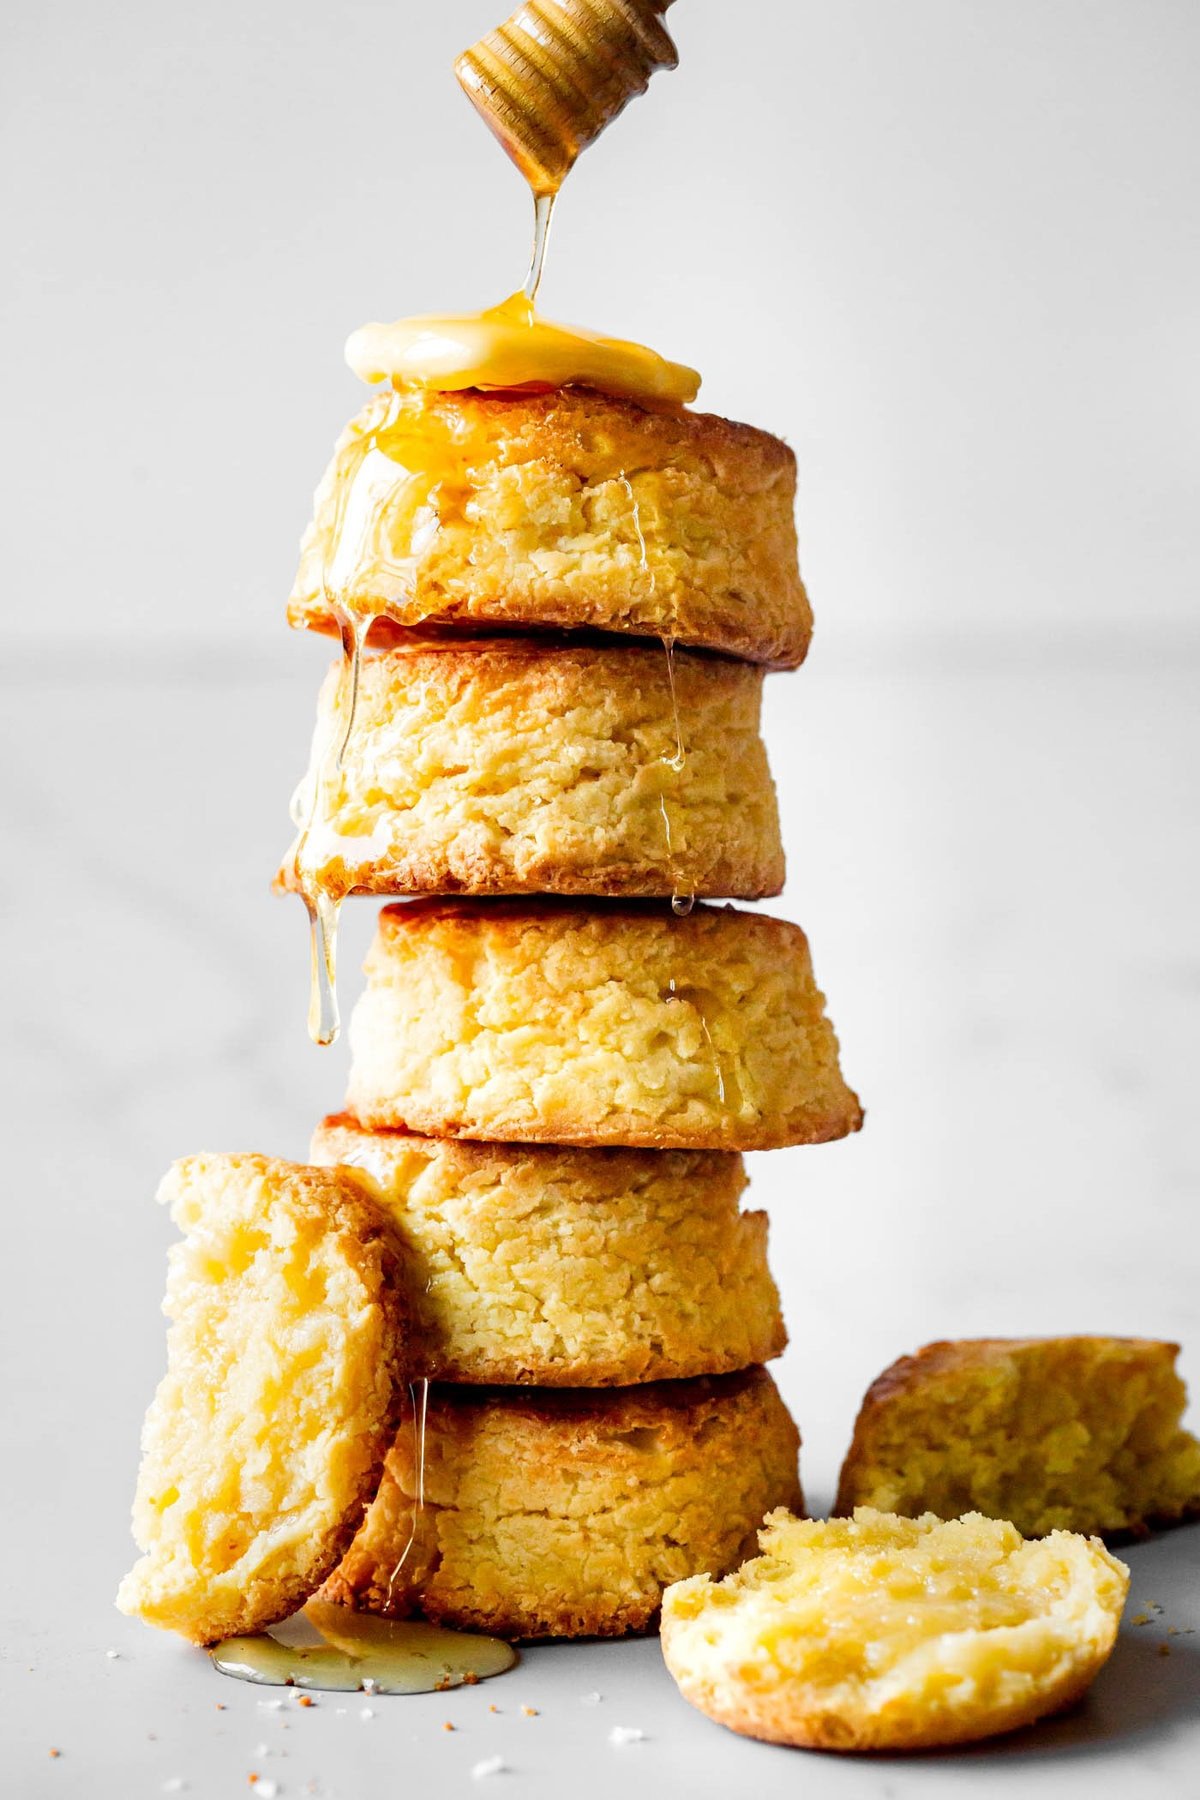 honey is being drizzled over a stack of biscuits topped with a pat of butter